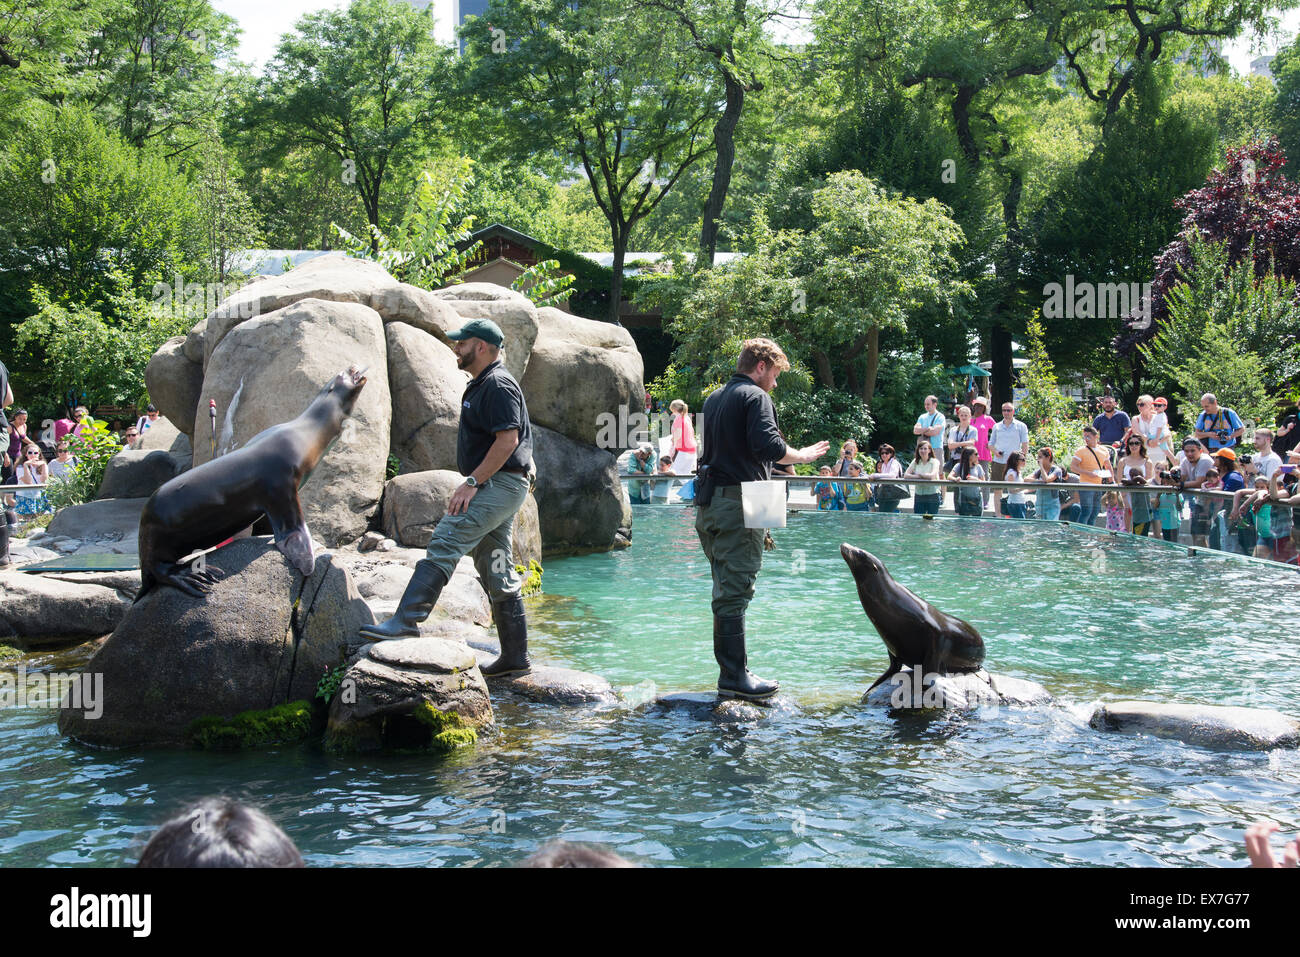 Sea Lions entertain visitors at Central Park Zoo Manhattan New York USA ...